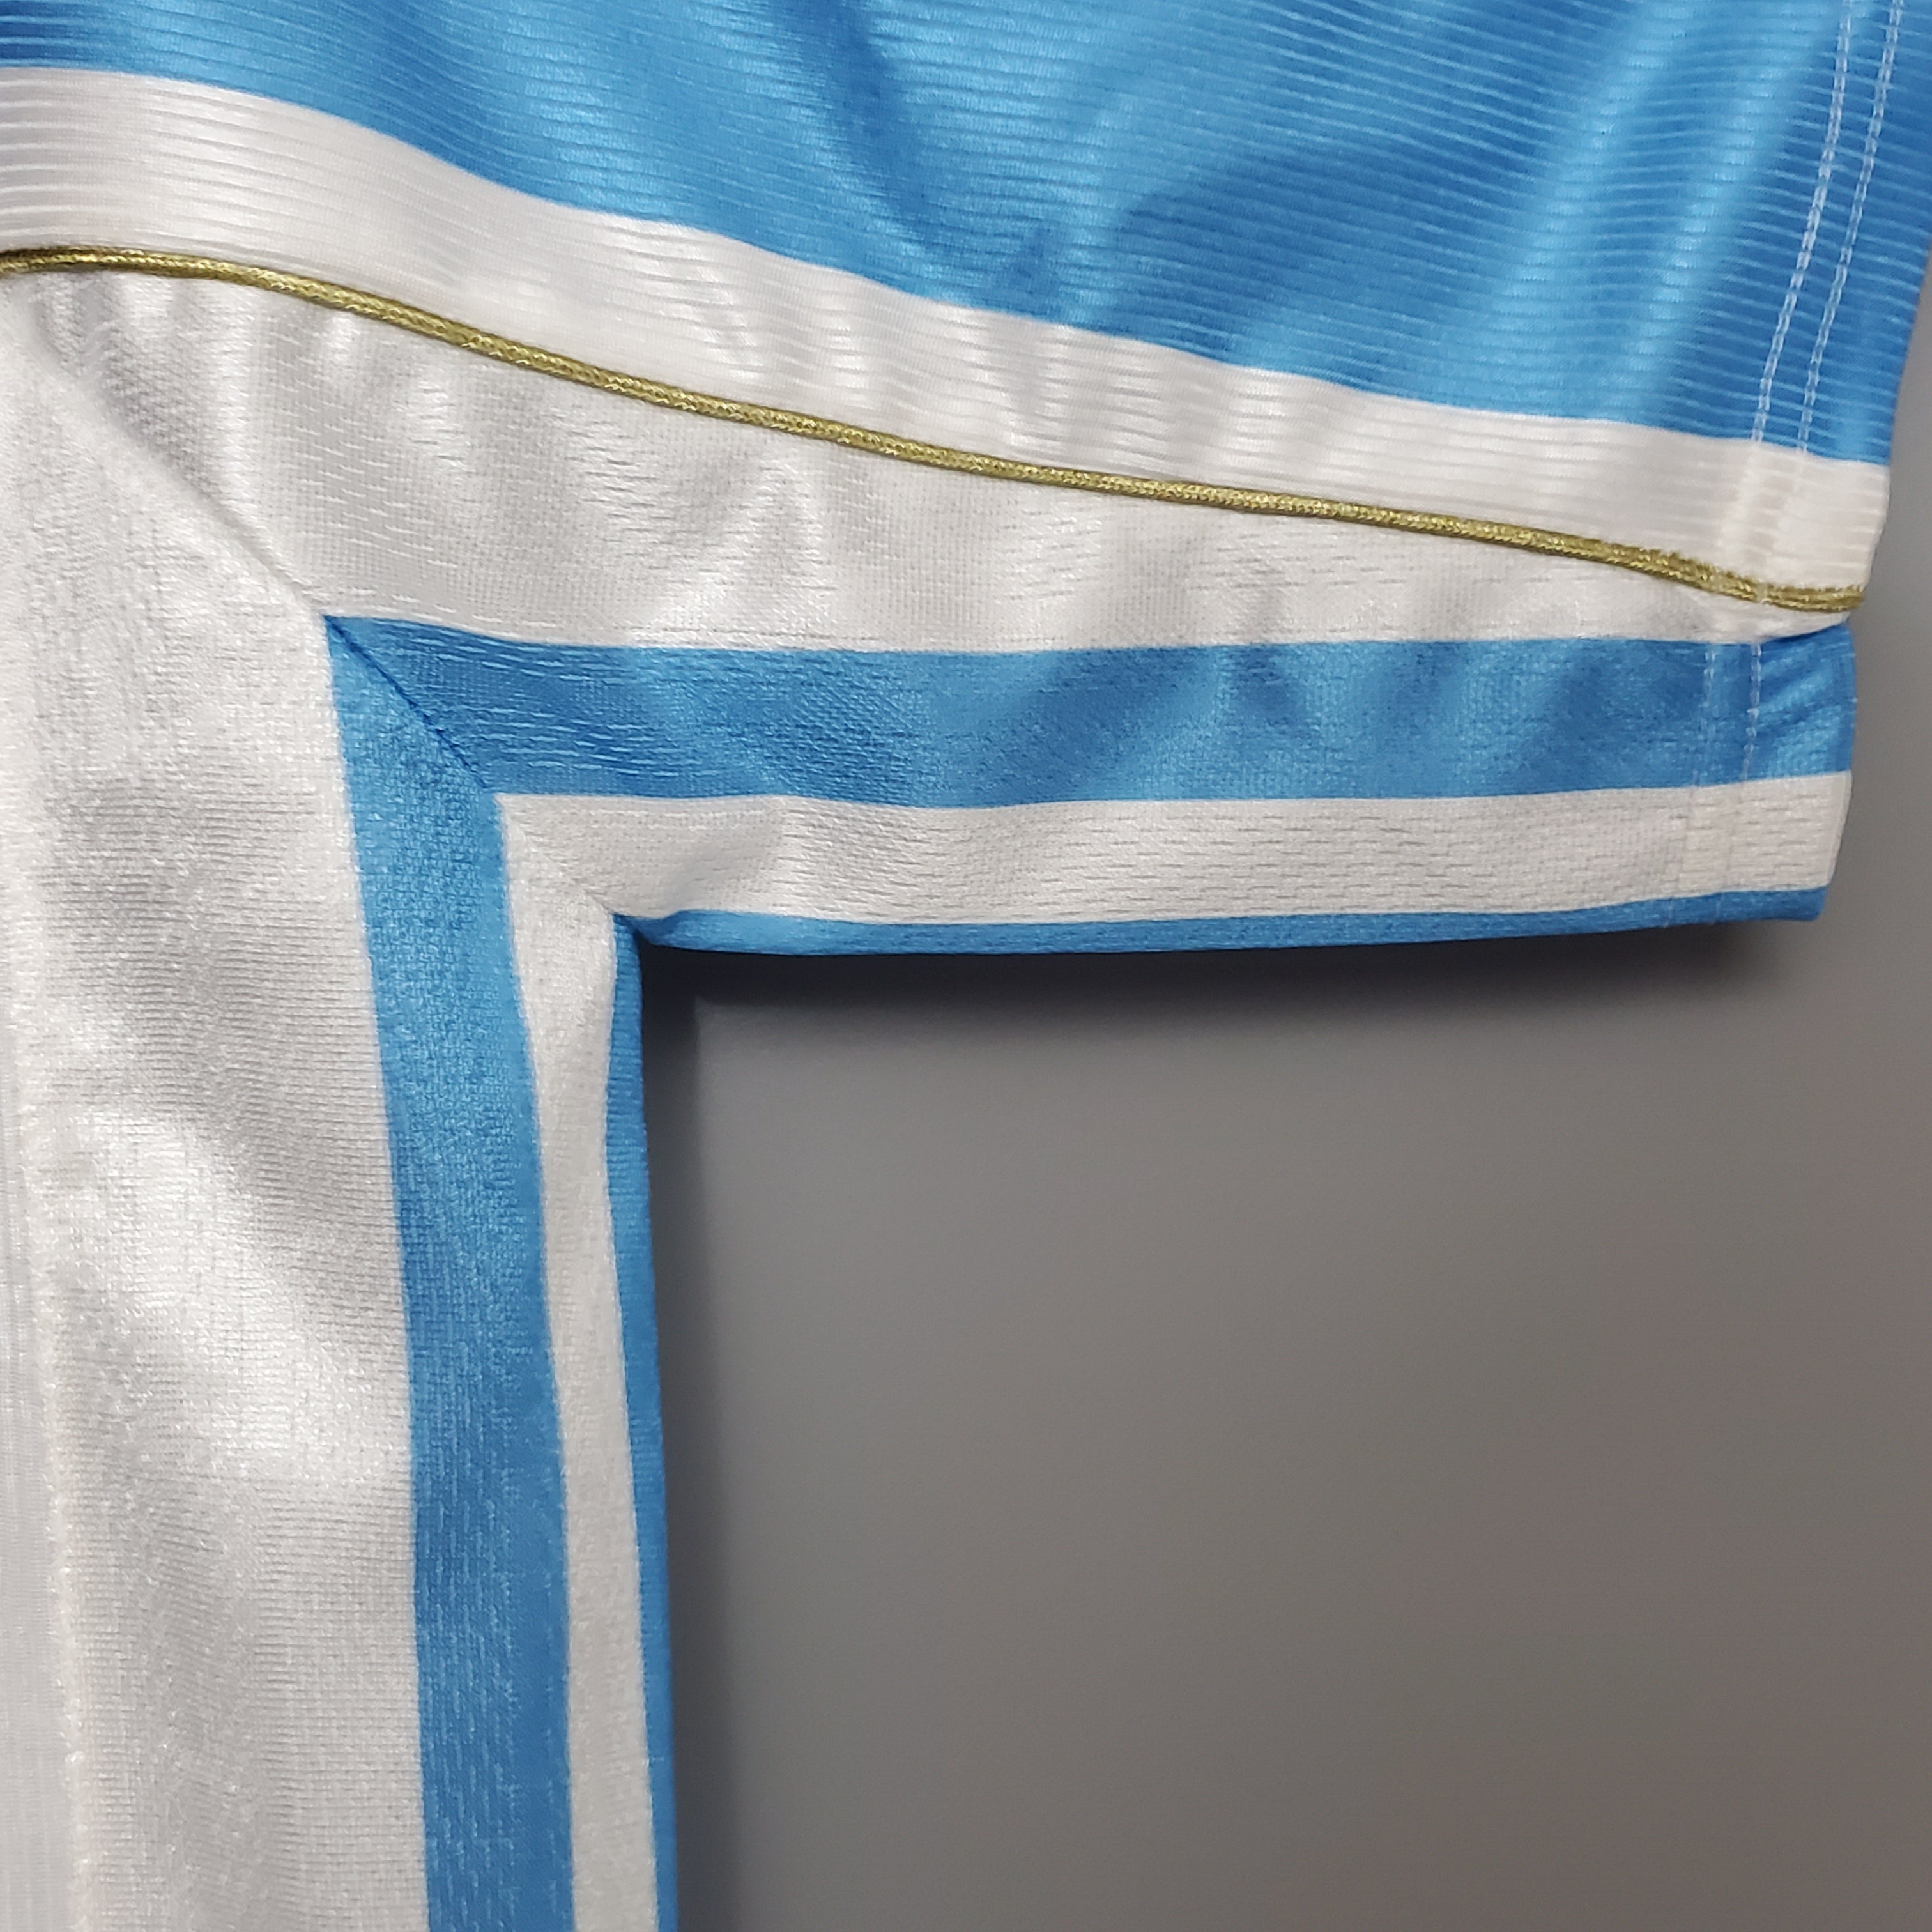 Argentina 1986 World Cup Retro Jersey Home